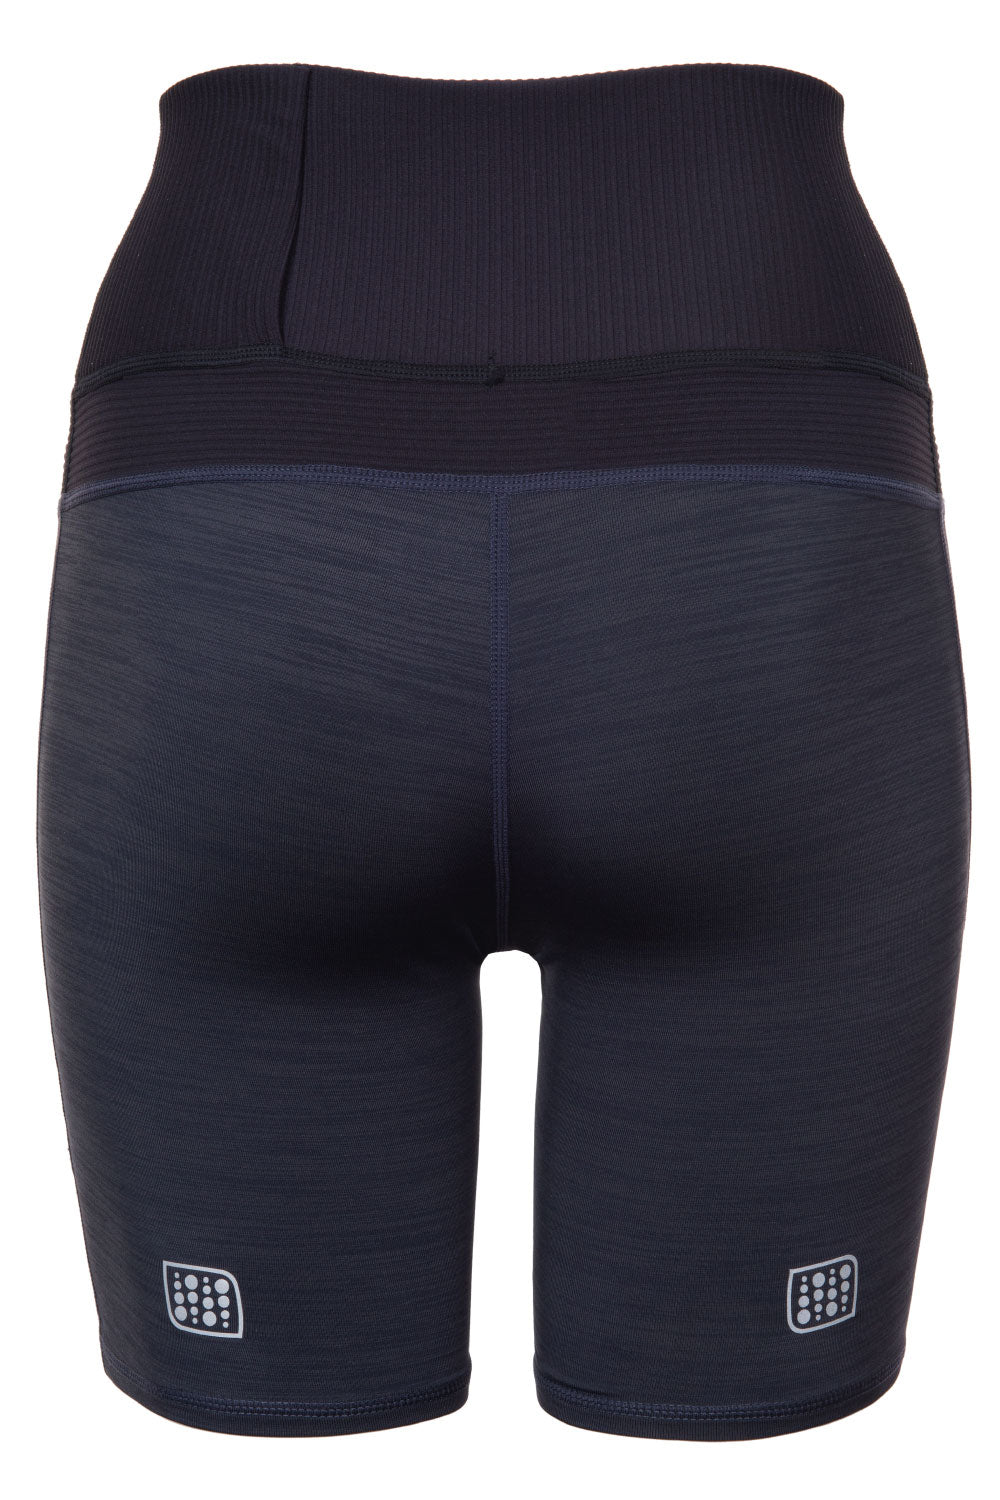 The High Waist Rowing/Cycling Short 8